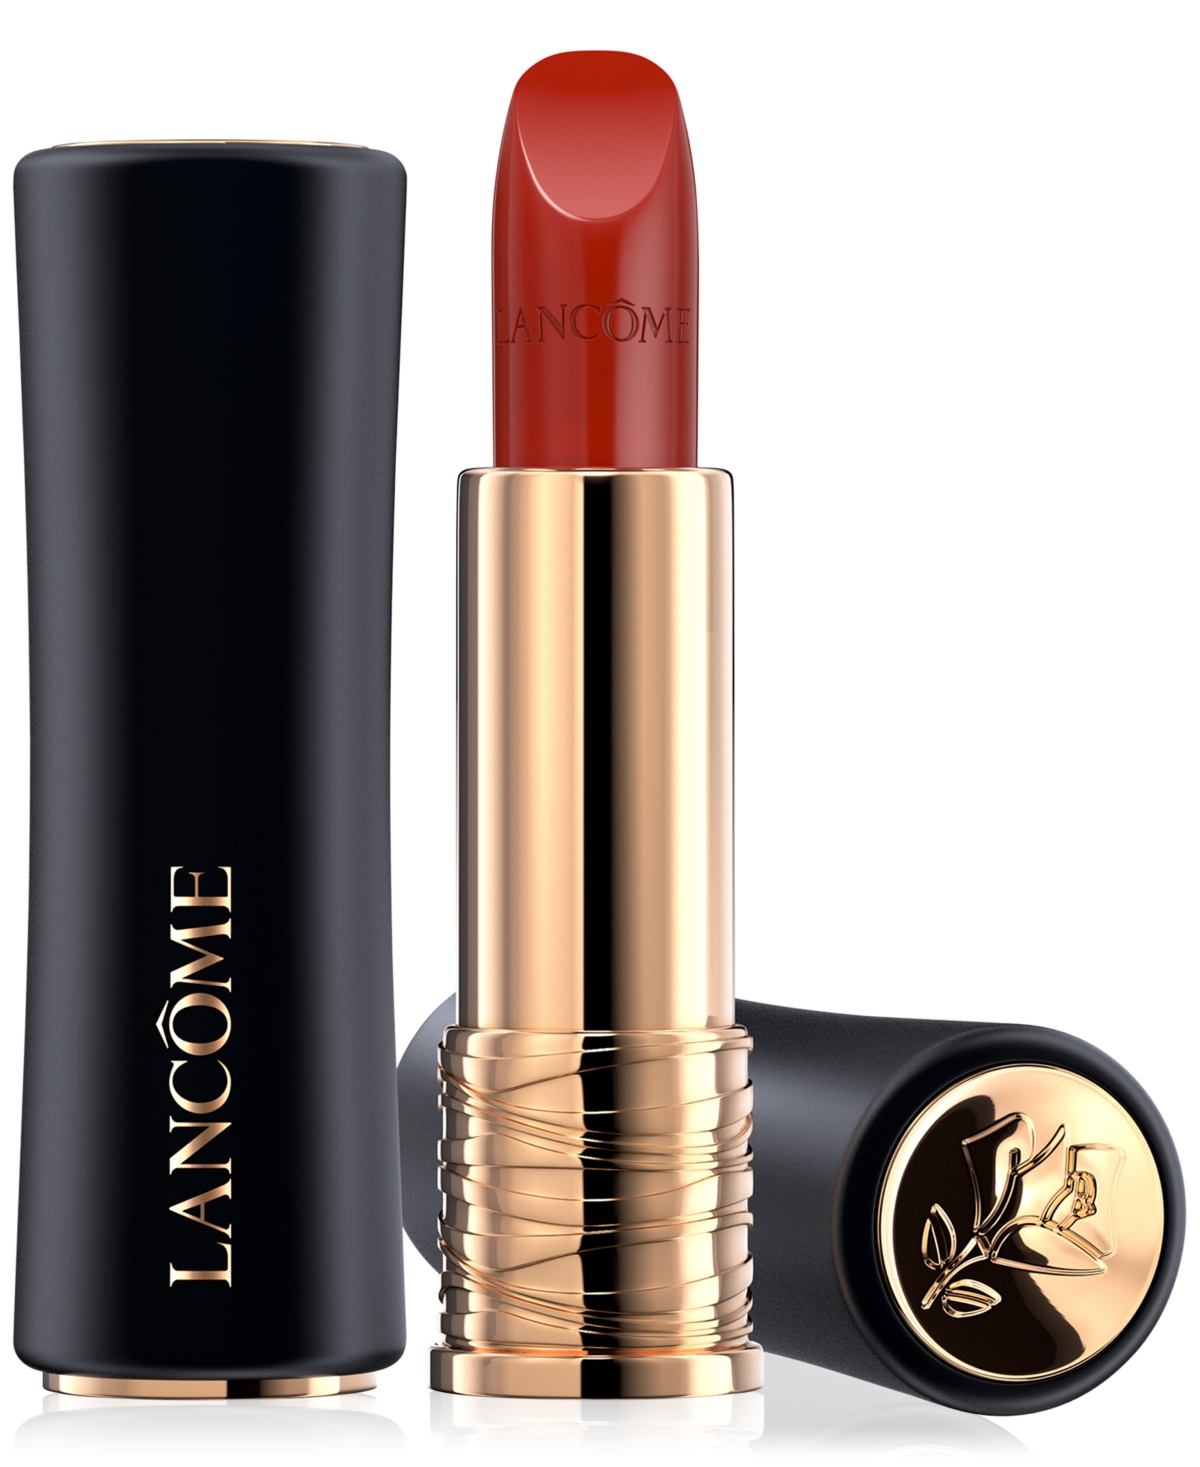 Lancôme L'absolu Rouge Cream Lipstick In -french-touch